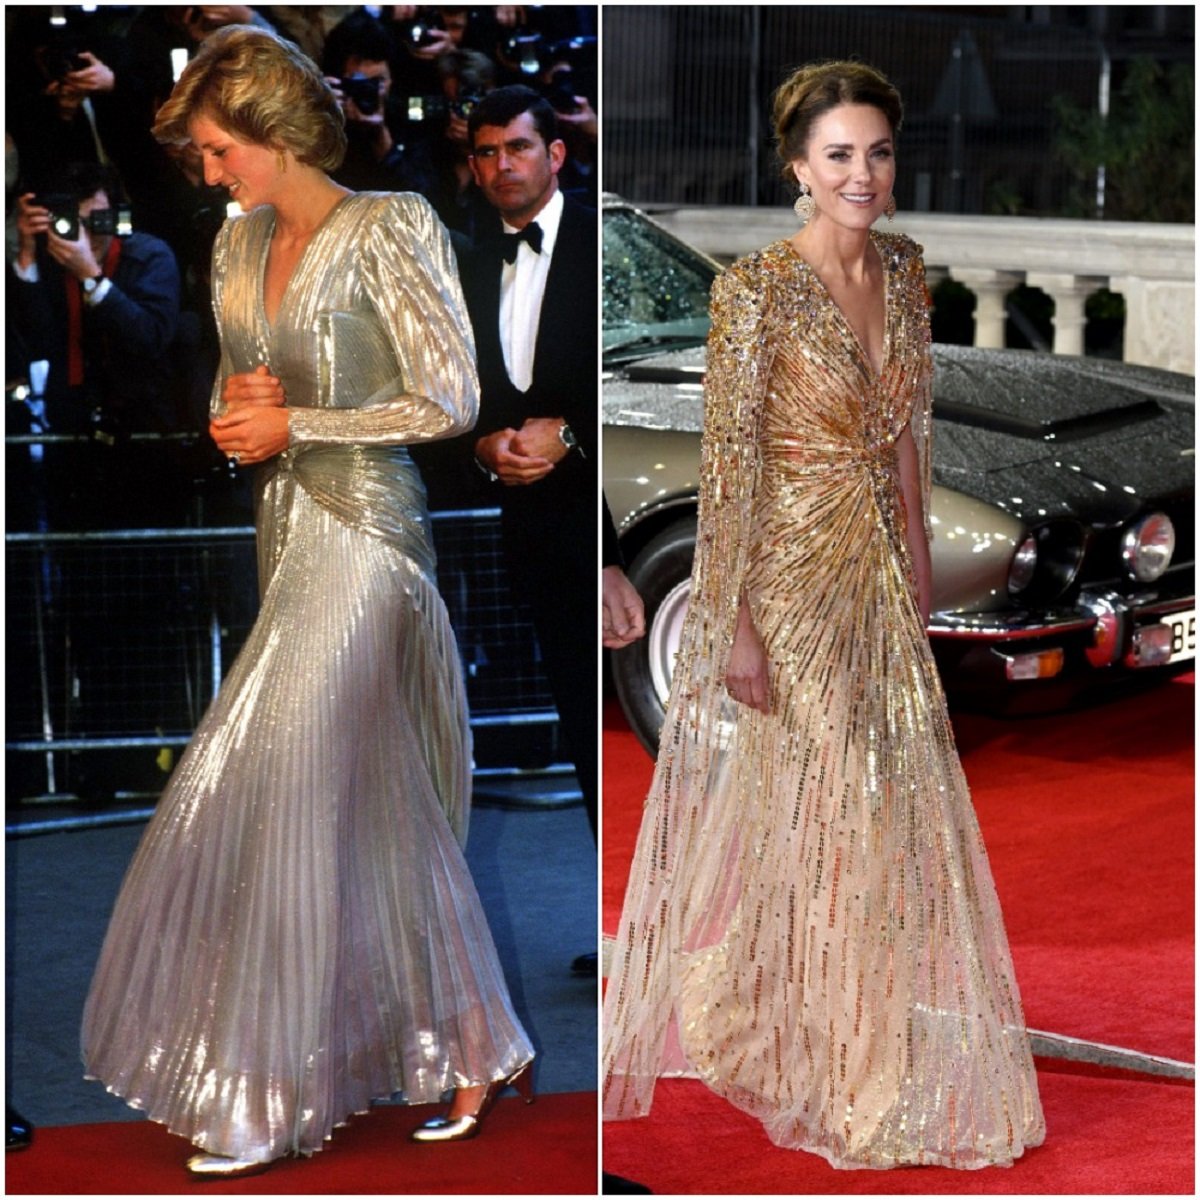 Photos of Kate Middletons Best Evening Gowns Over the Years